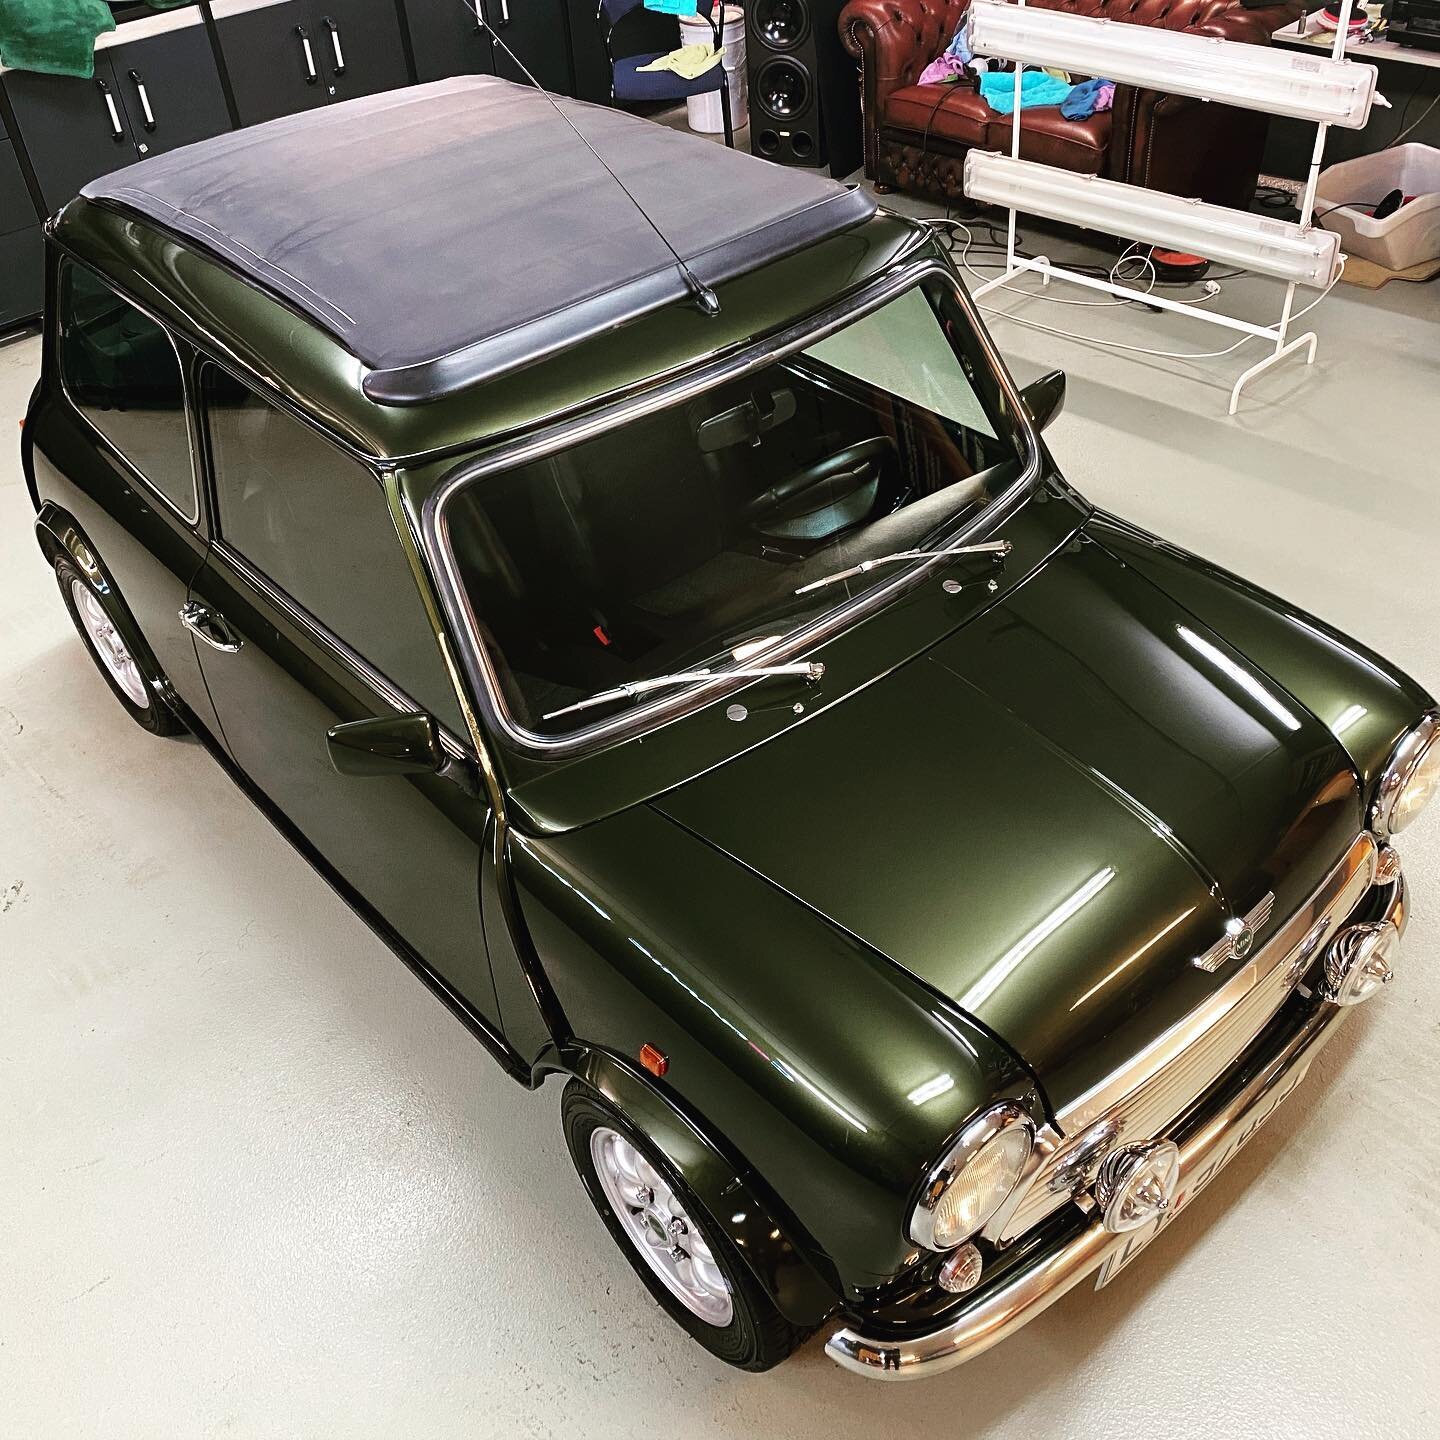 #size doesn&rsquo;t really matter 😎 We take a #good #care of any #car ‼️Classic #mini in for some #tlc Full #paintcorrection and #naural #wax Small interior #repairs &amp; full #detail #wecareforyourcar @carecenteras